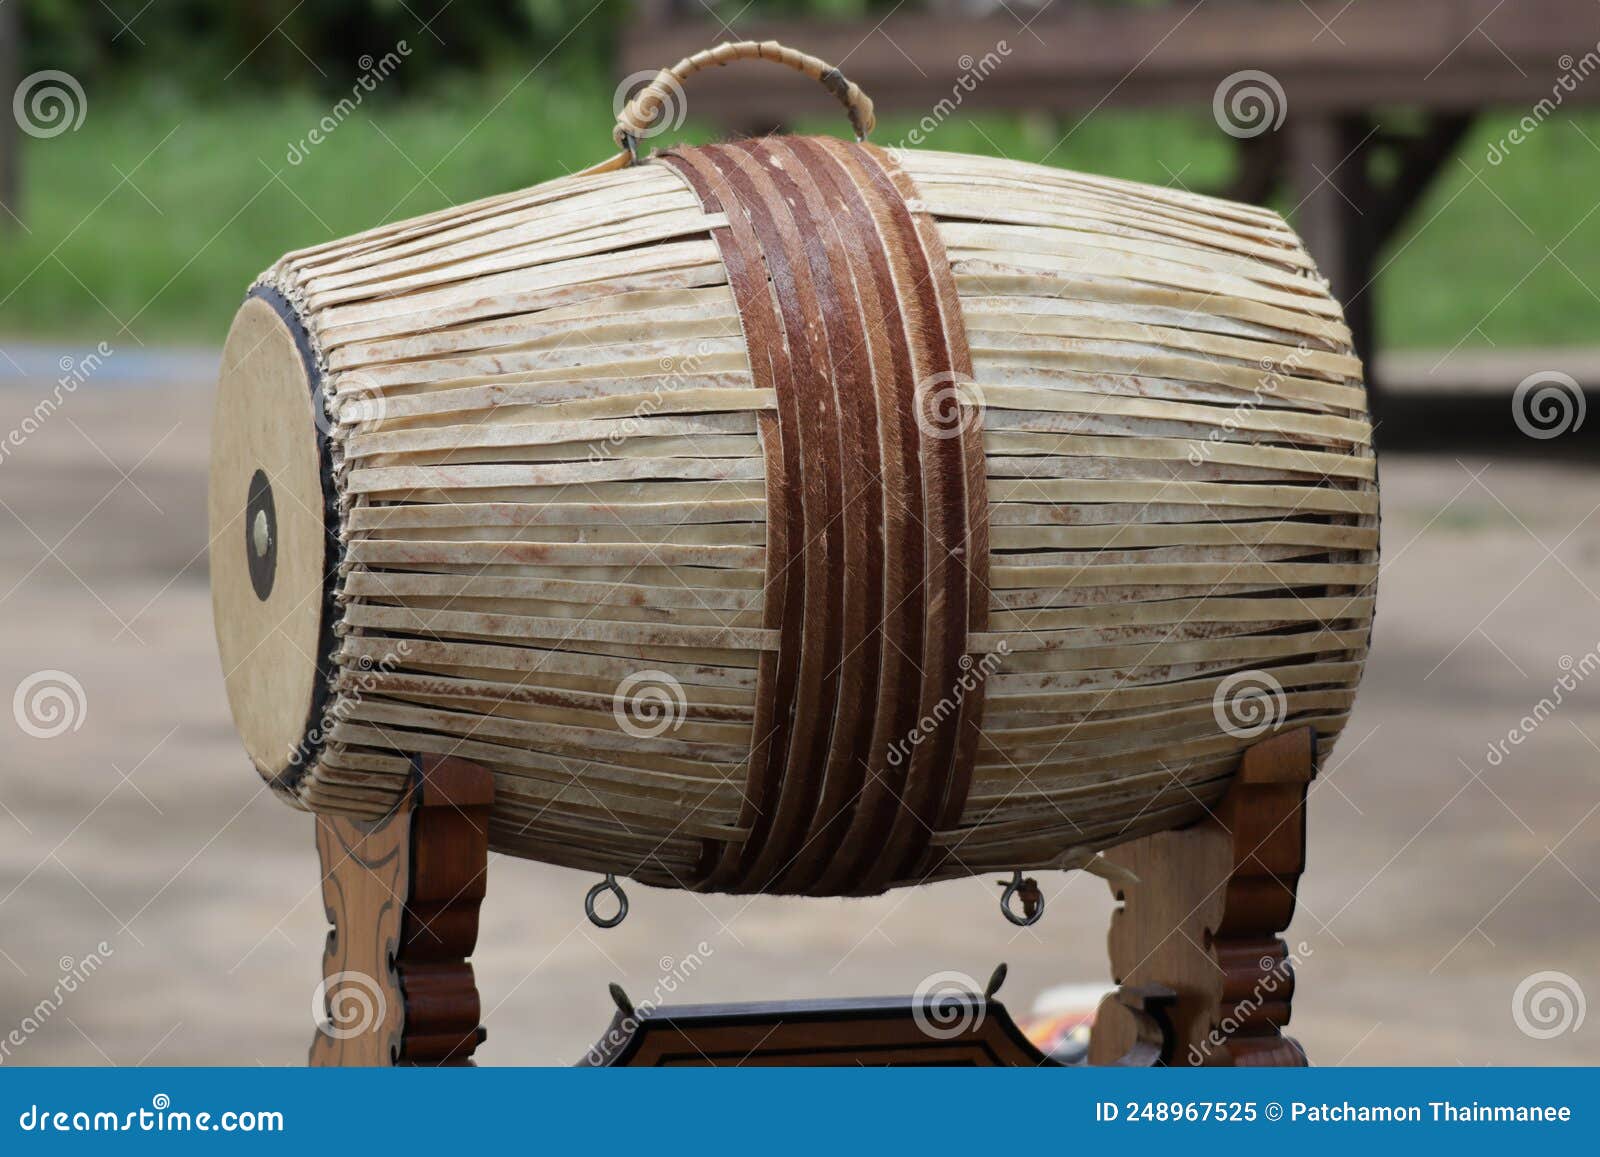 A Small Wooden Drum is a Thai Musical Instrument Located Outdoors ...